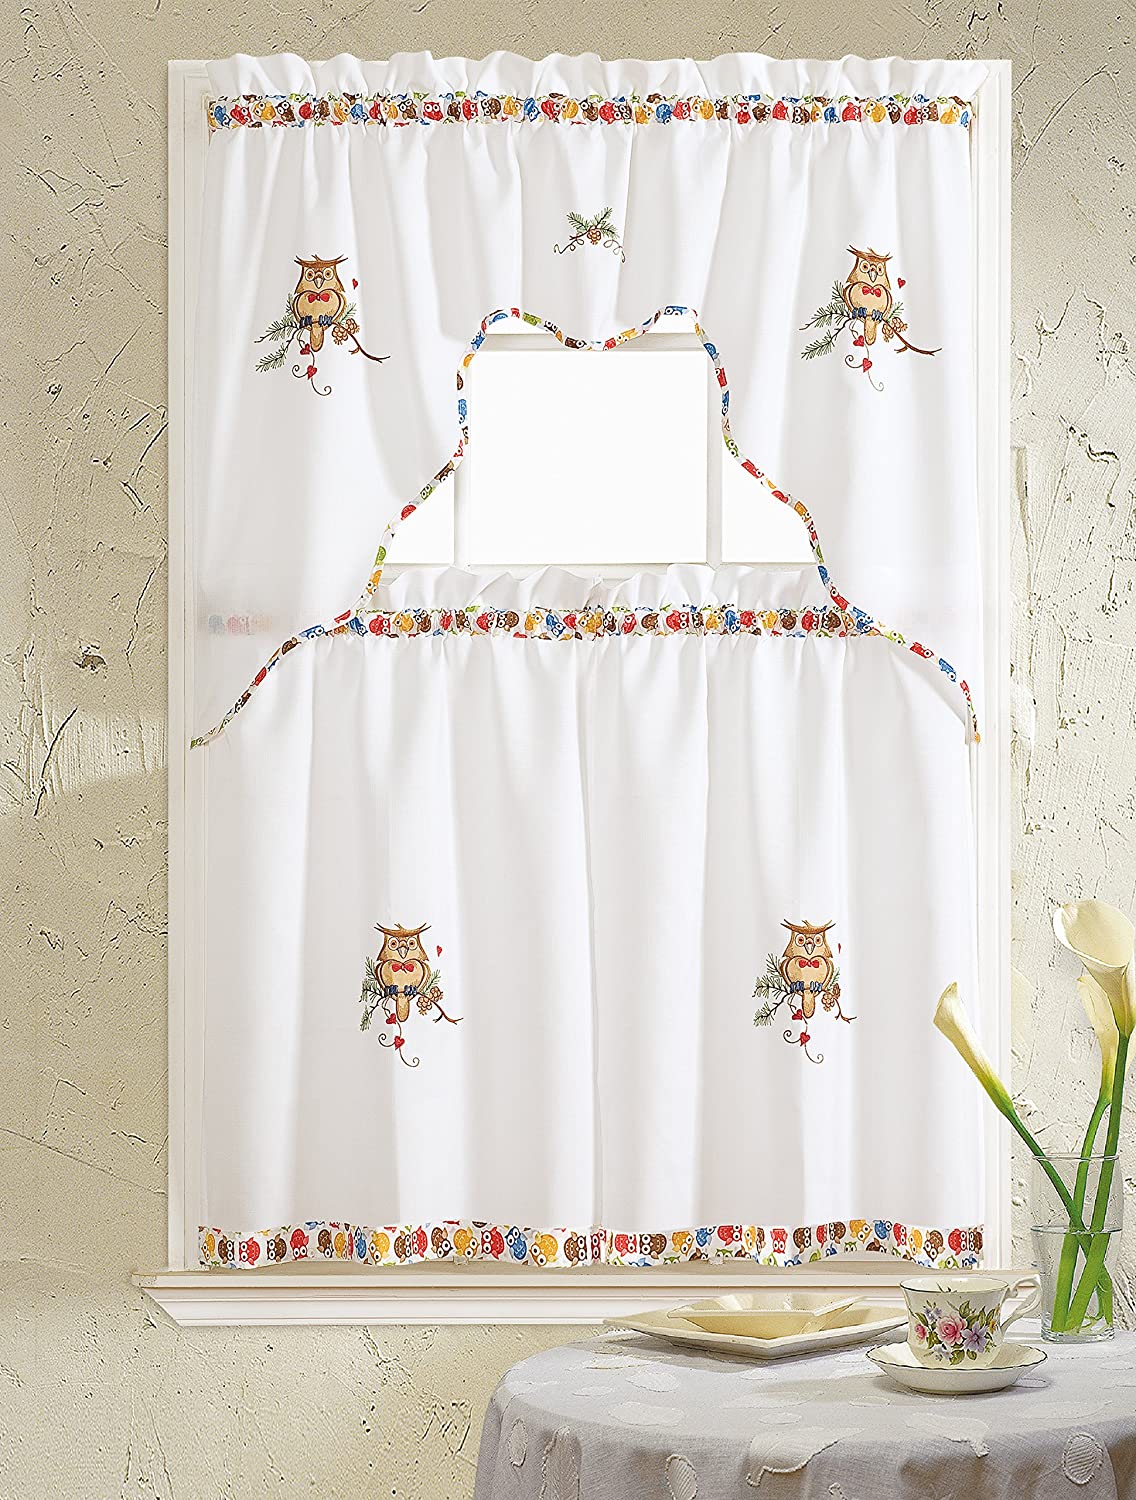 RT Designers Collection 3 Piece Embroidered Kitchen Curtain - 60 x 36 in. - Linen Universe Co.